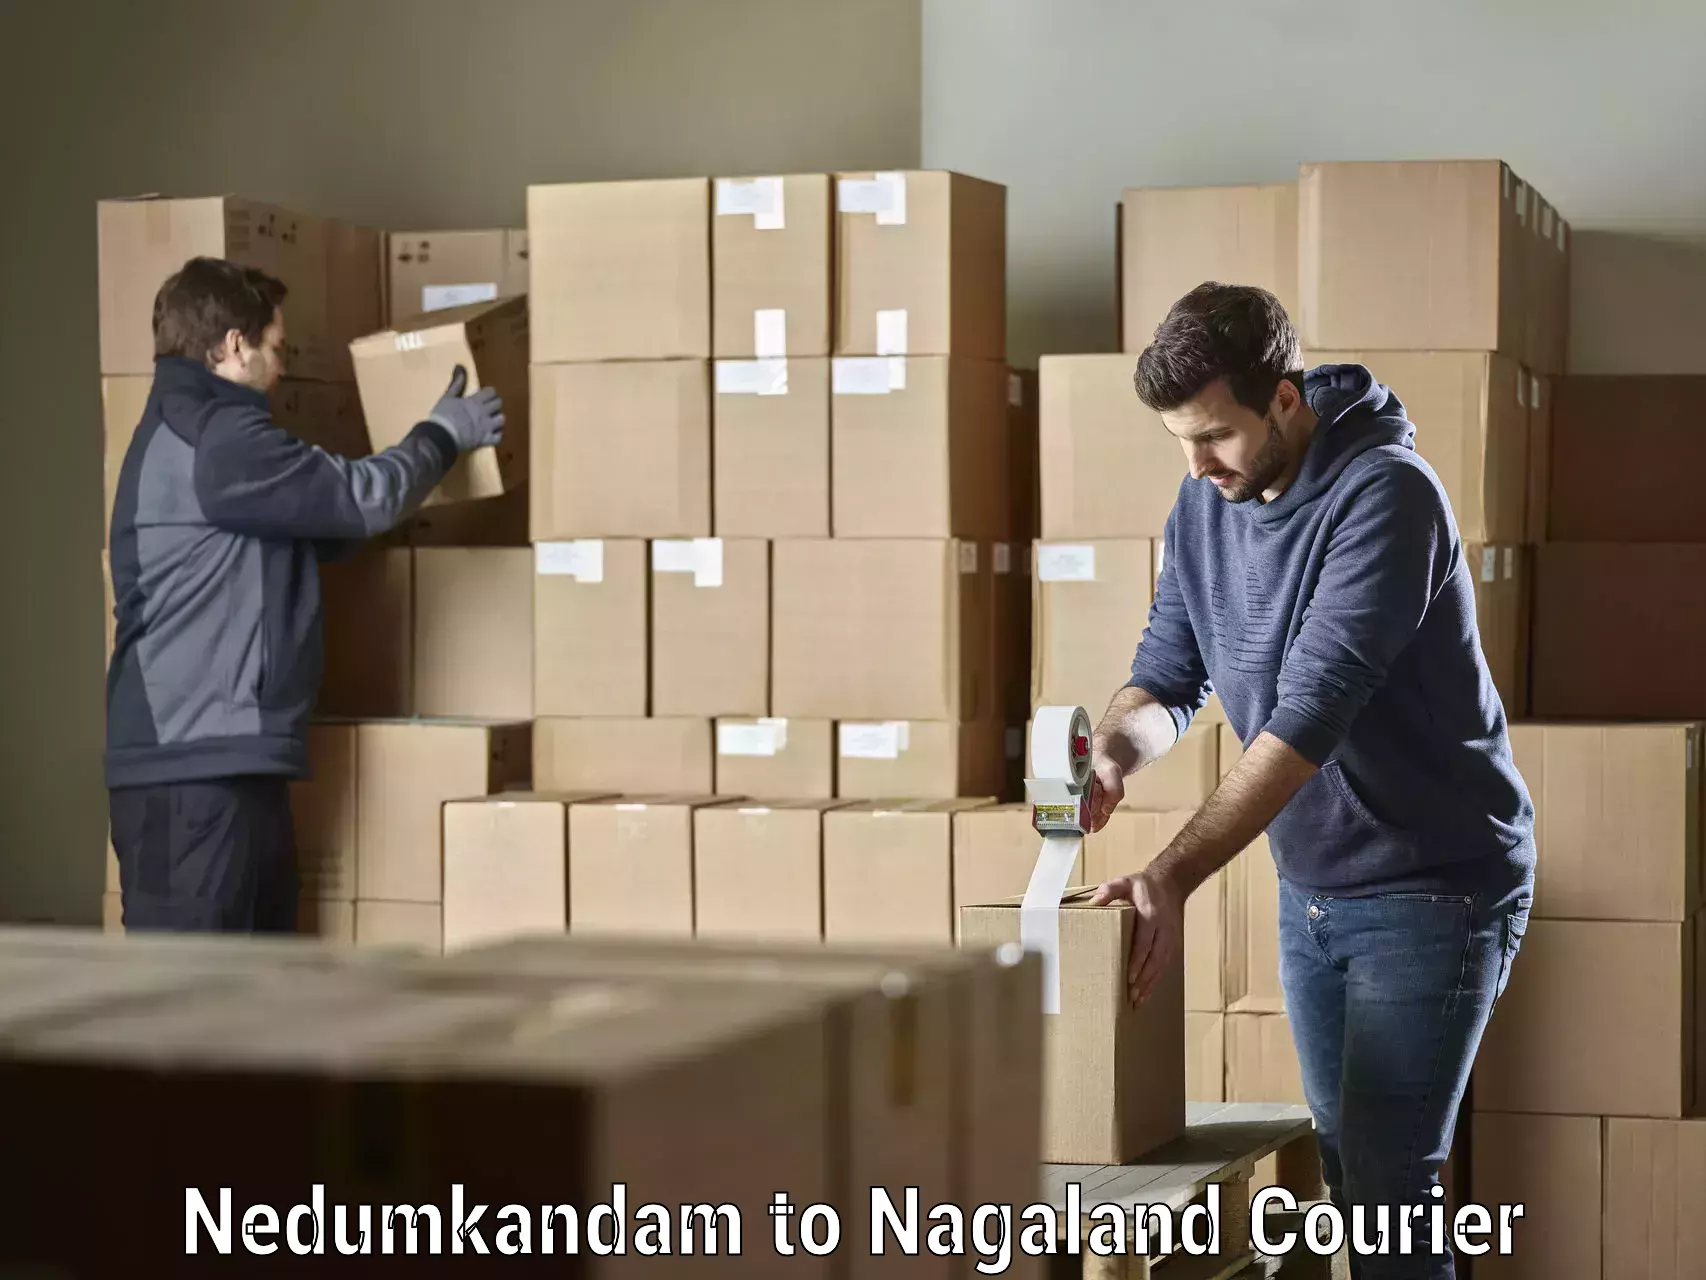 Professional parcel services in Nedumkandam to Mokokchung